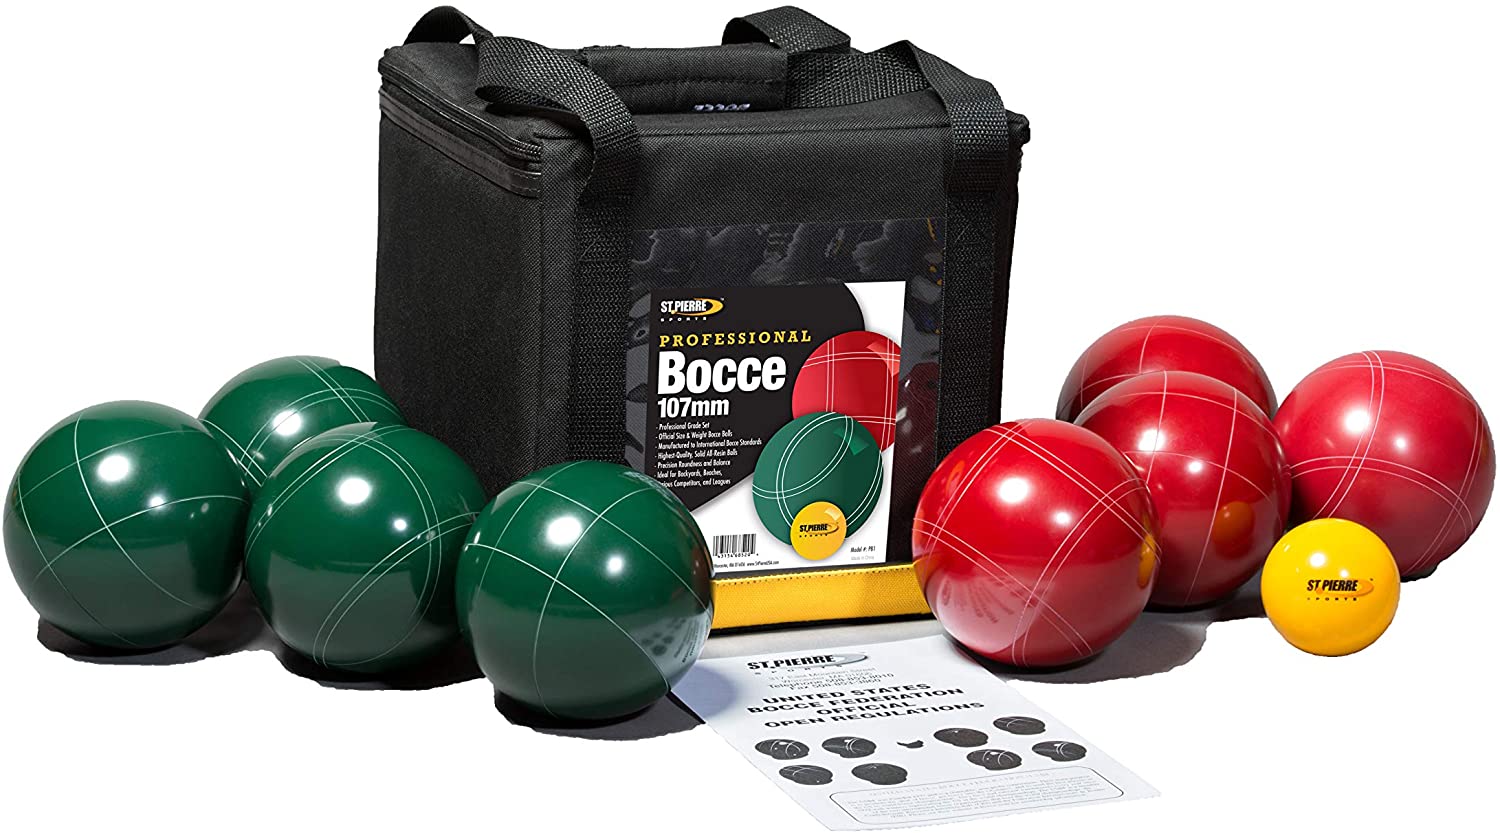 St Pierre Sports Professional Competition Bocce Ball Set